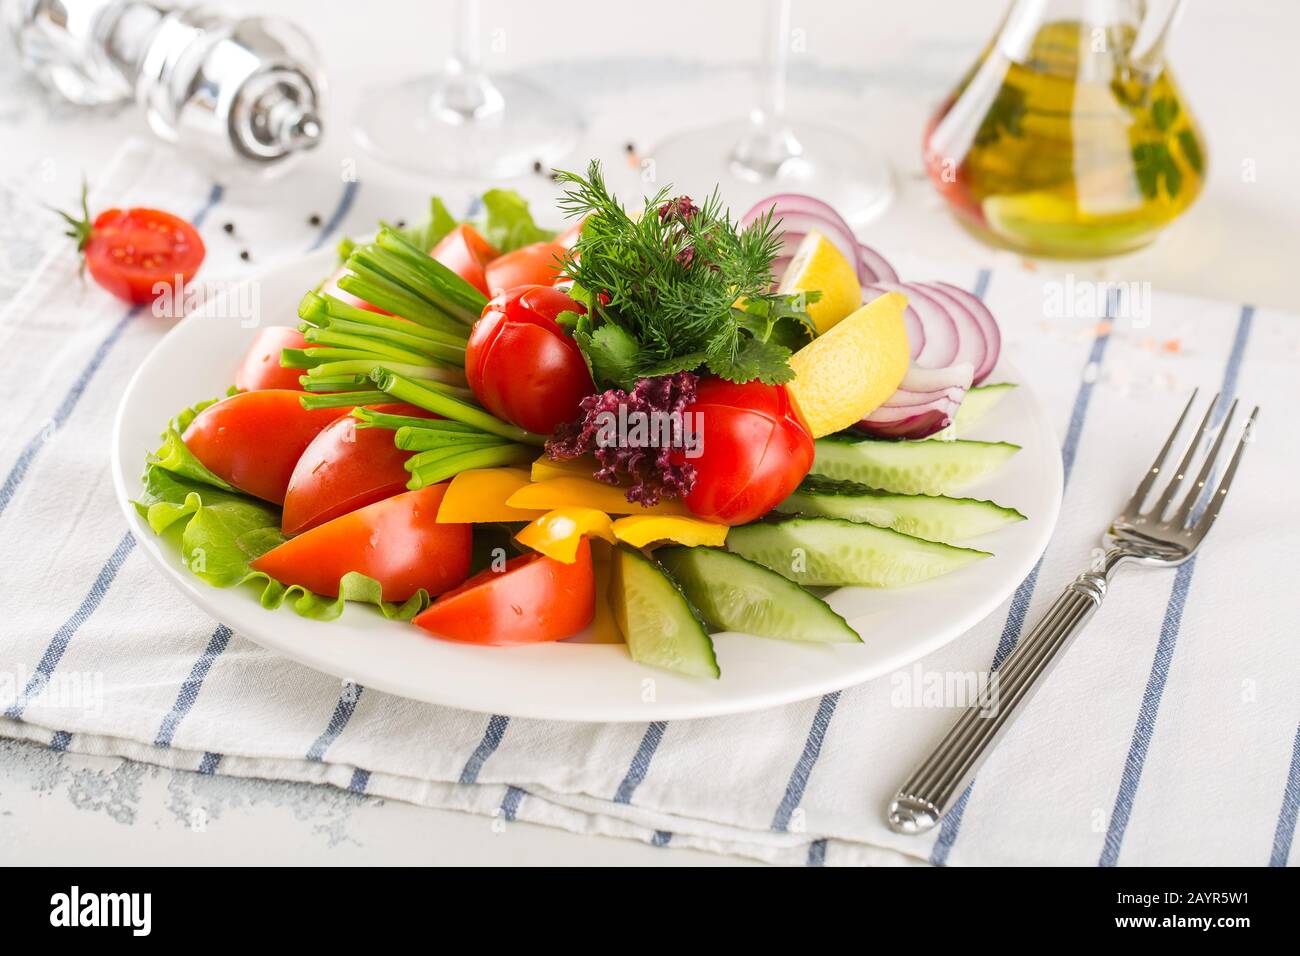 Assorted fresh vegetables on a plate. Stock Photo